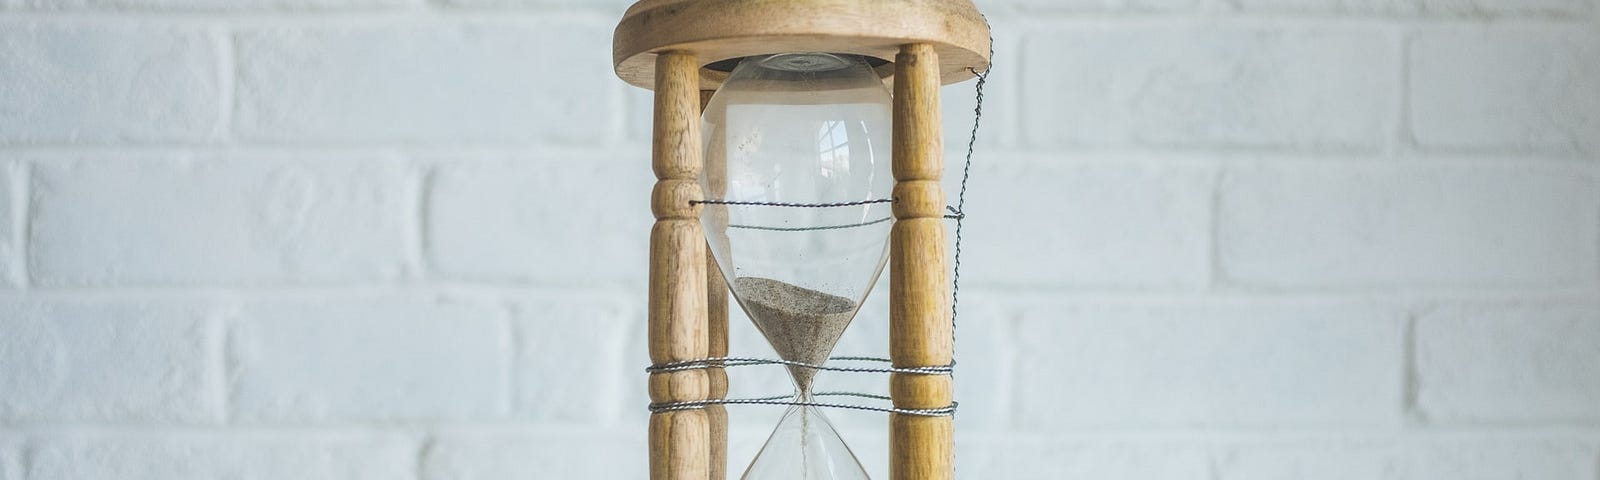 An hourglass flowing sand